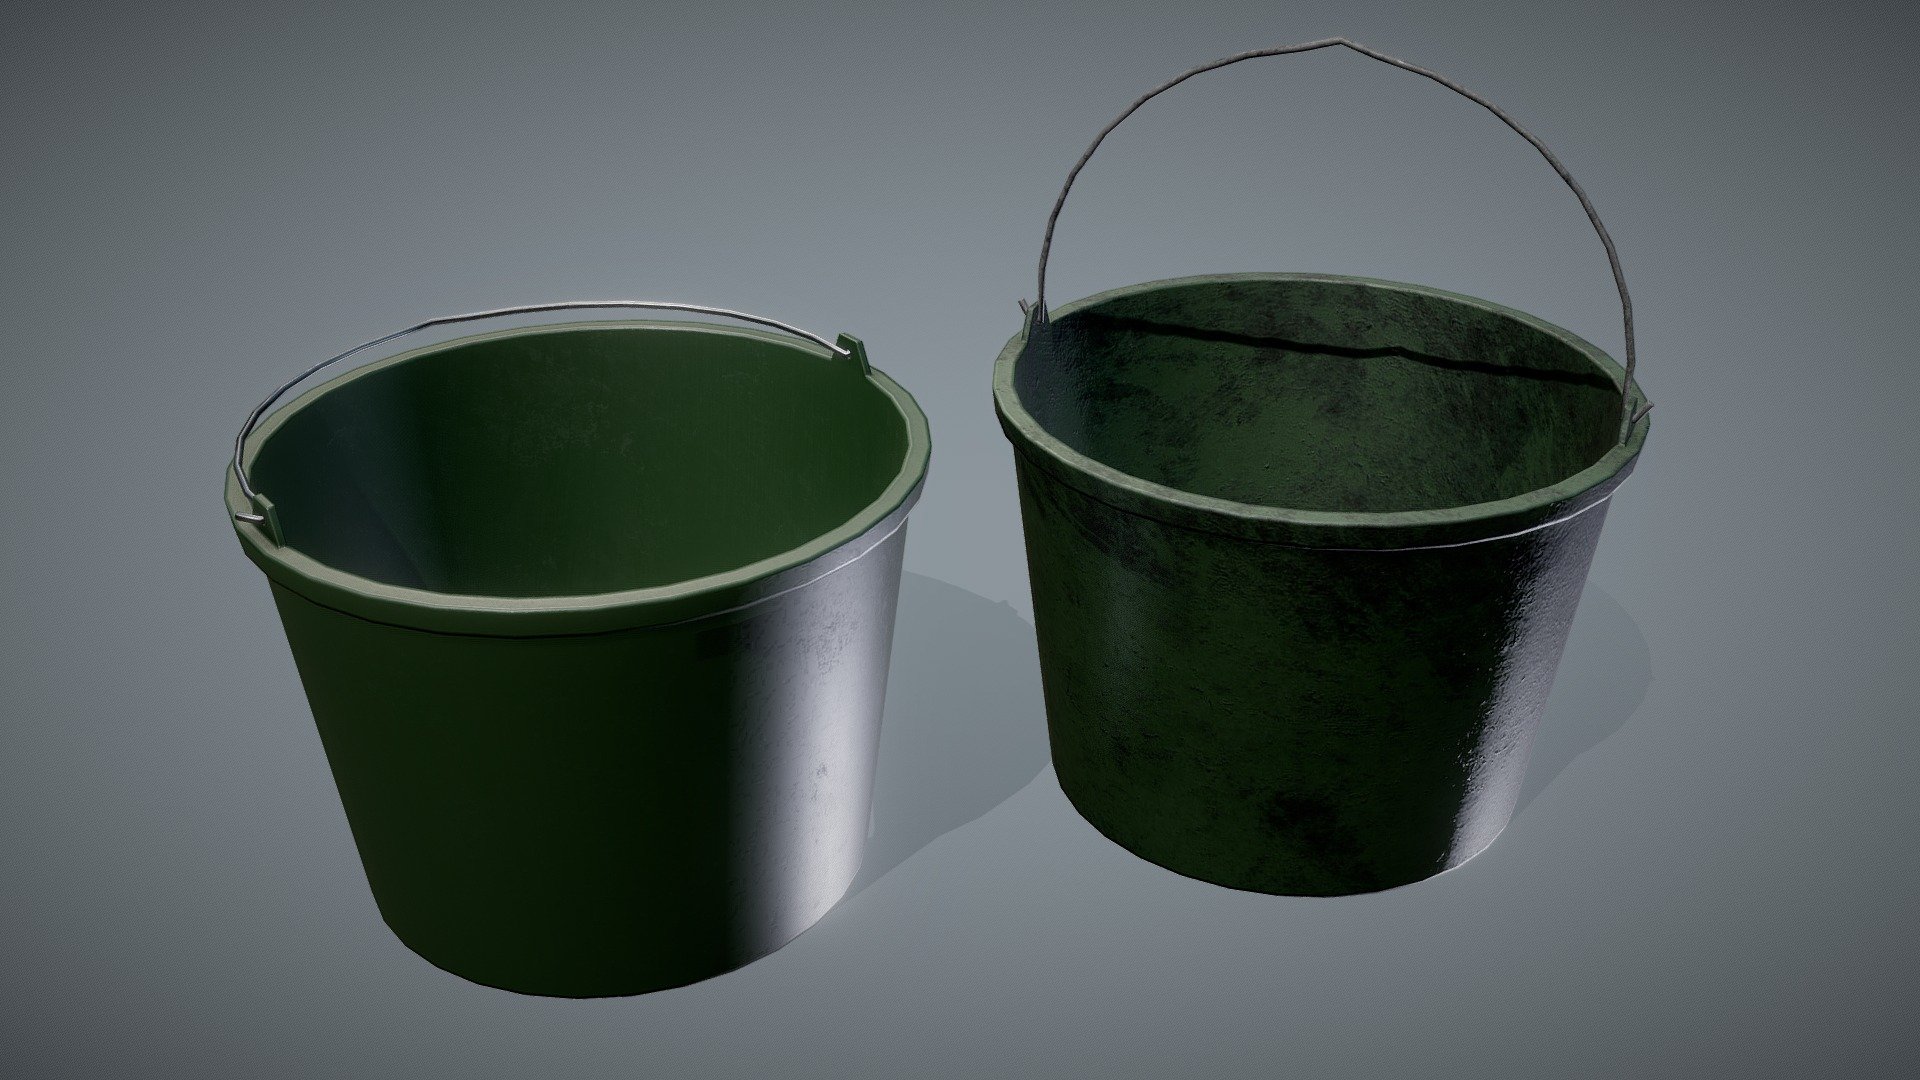 Additional file contains manually made LODs in 3 stages and custom collider in .fbx, gltf. and .obj formats as well as 2x2k texture sets (clean and dirty) for Unity5, Unity HDRP, UnrealEngine4, PBR Metal Roughness - Plastic Garden Bucket - Buy Royalty Free 3D model by NollieInward 3d model